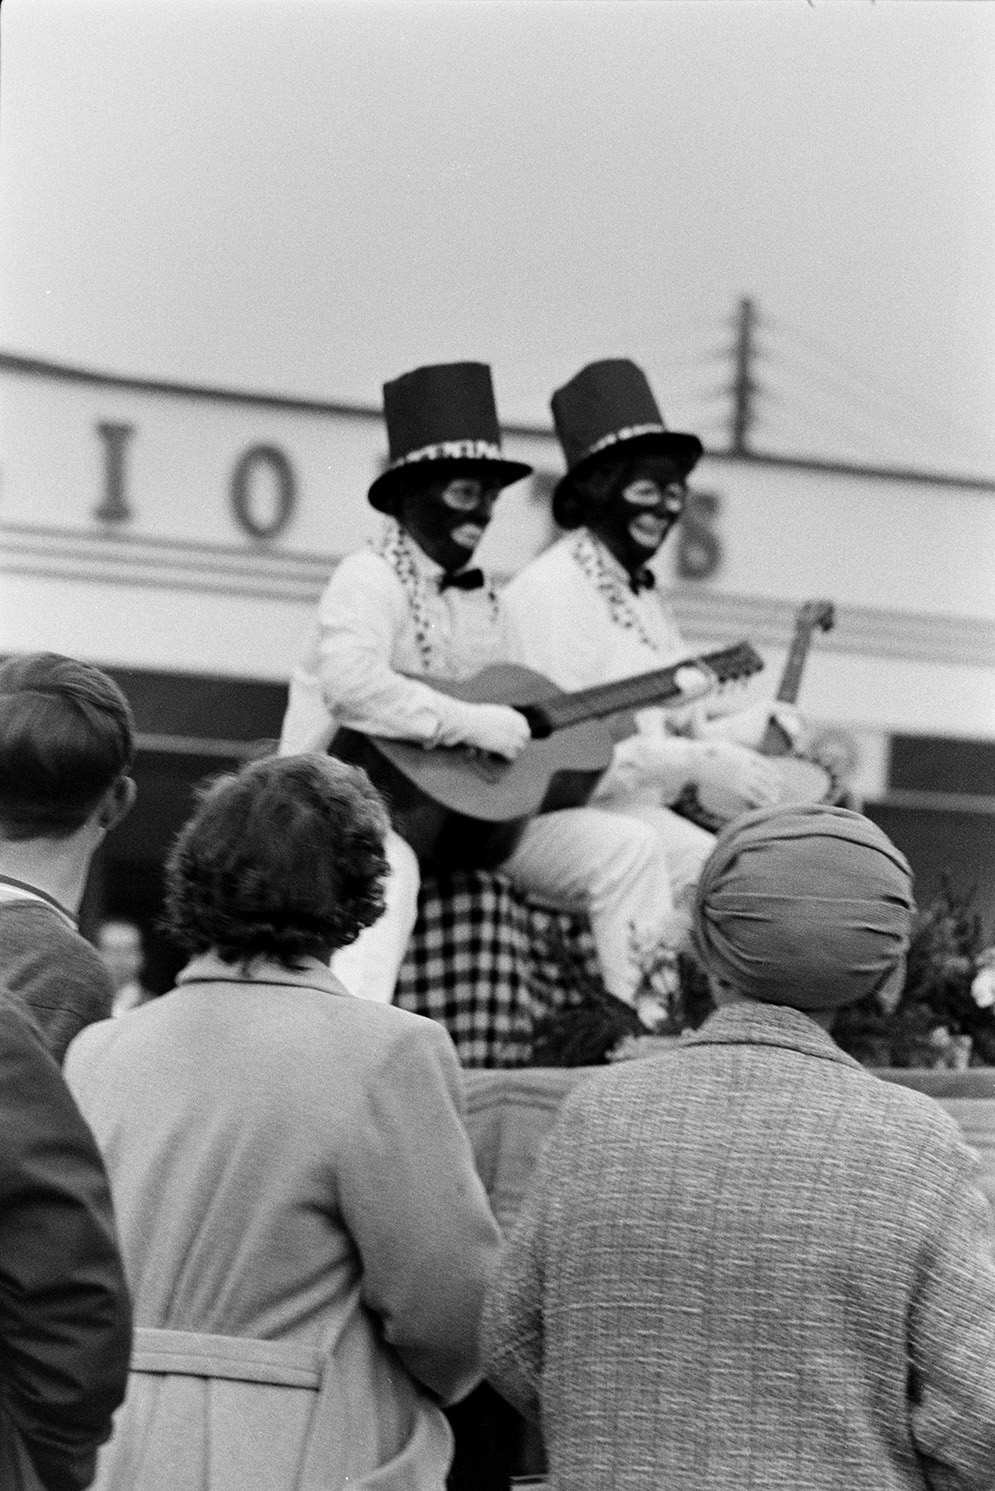 People watching Bideford carnival procession. Two people on one of the carnival floats are dressed as Black and White Minstrels, and playing a guitar and banjo.